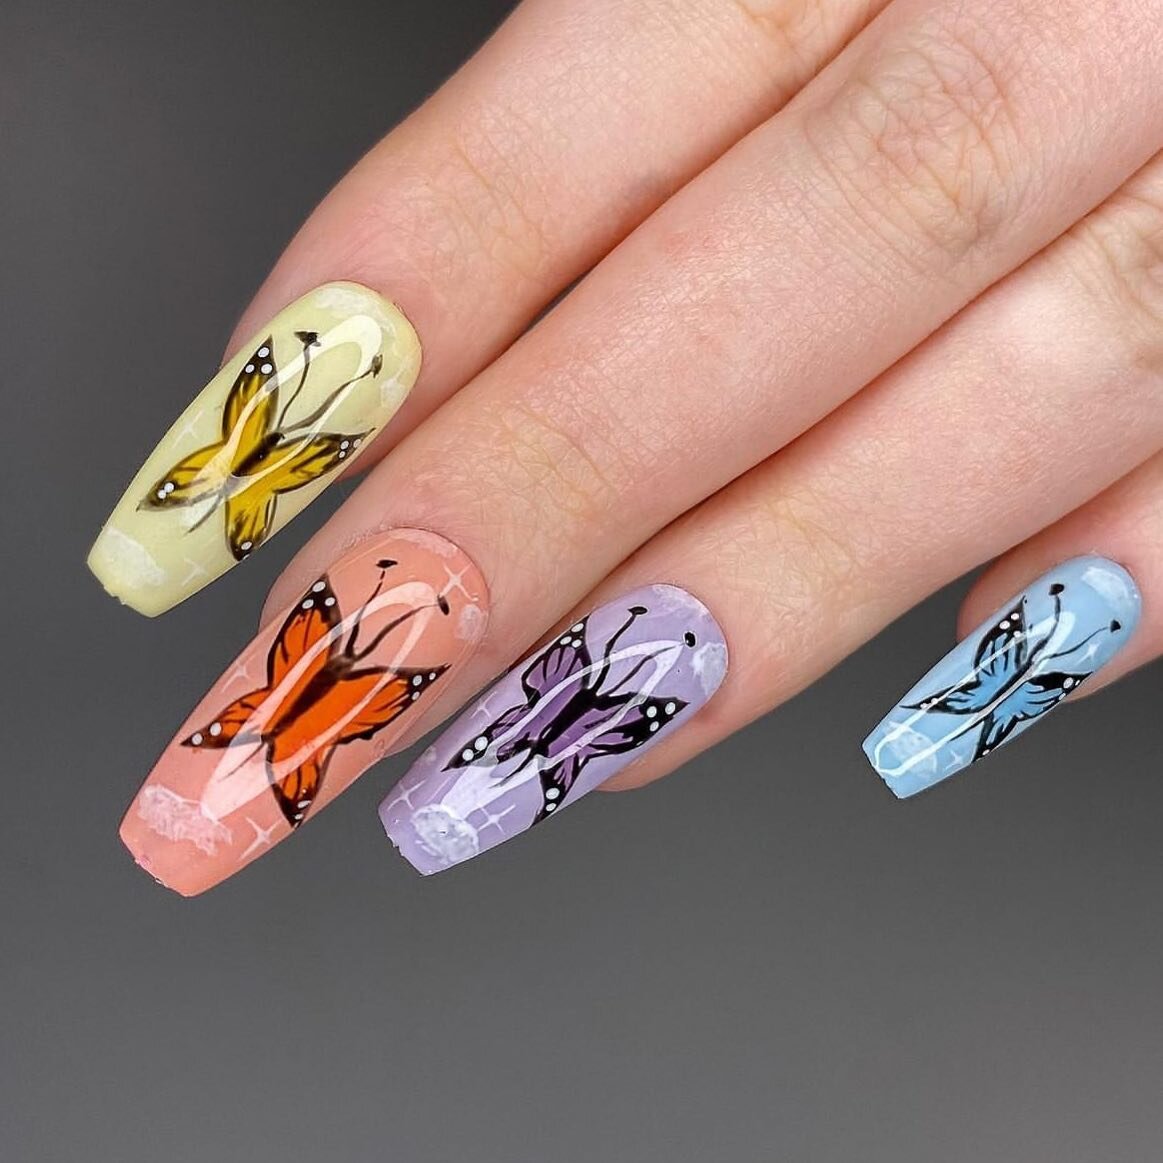 🦋 Butterfly nails by @del_ti_x 🦋 To make an appointment with Mari Dm her page @del_ti_x or book online via the @del_ti_x page! 

#nailartwales #northwales #nailartqueen #caernarfonsalon